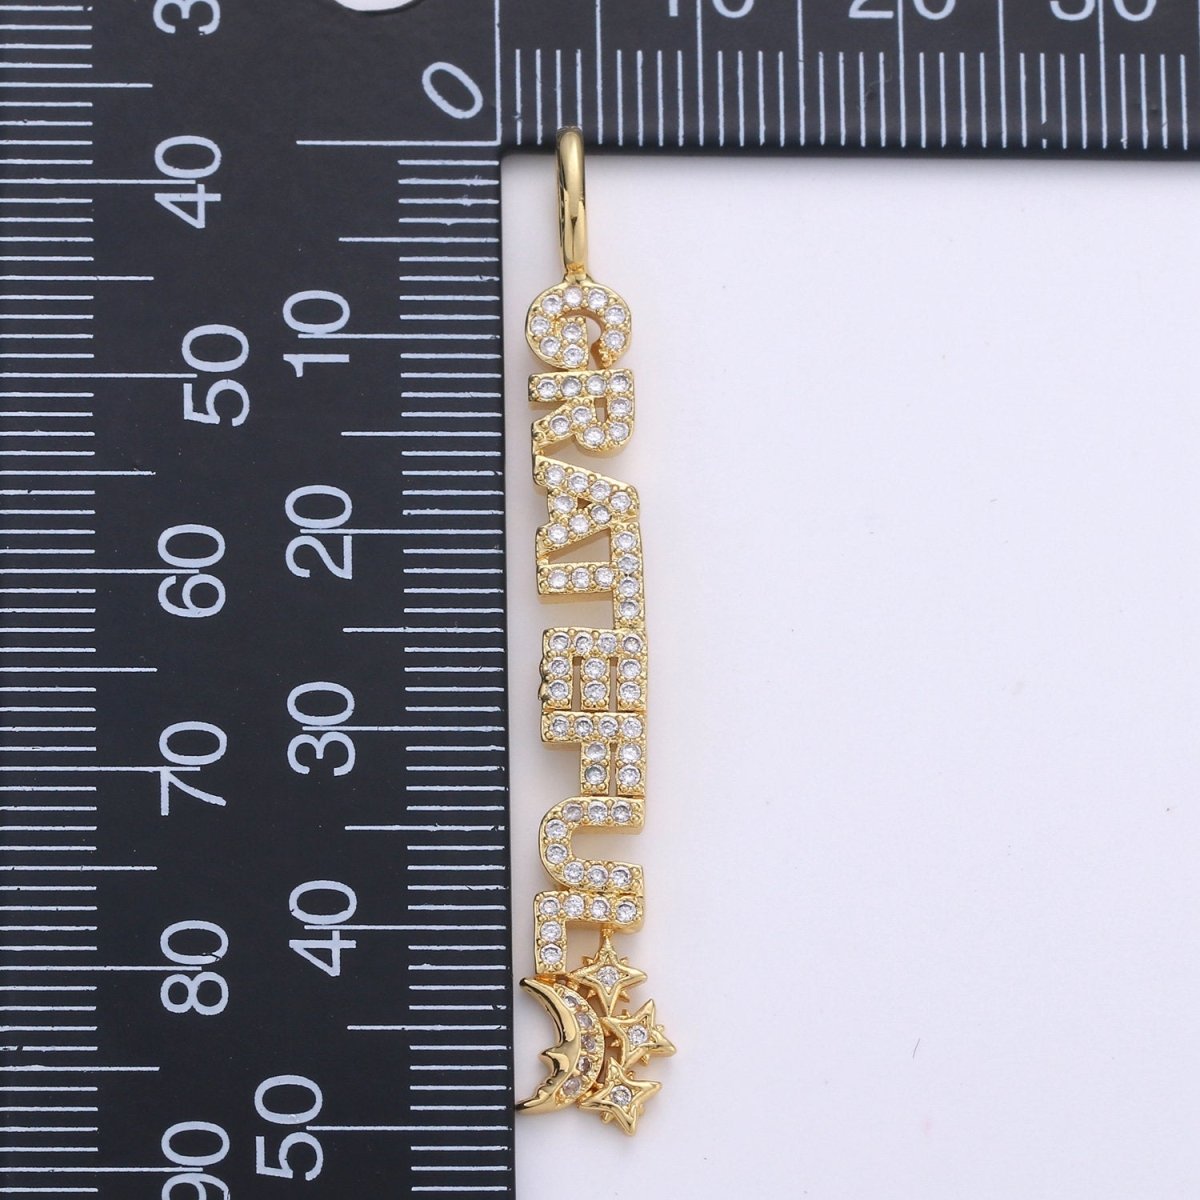 14k Gold Filled Micro Pave Grateful Charm for Statement Necklace Pendant, D-090 - DLUXCA